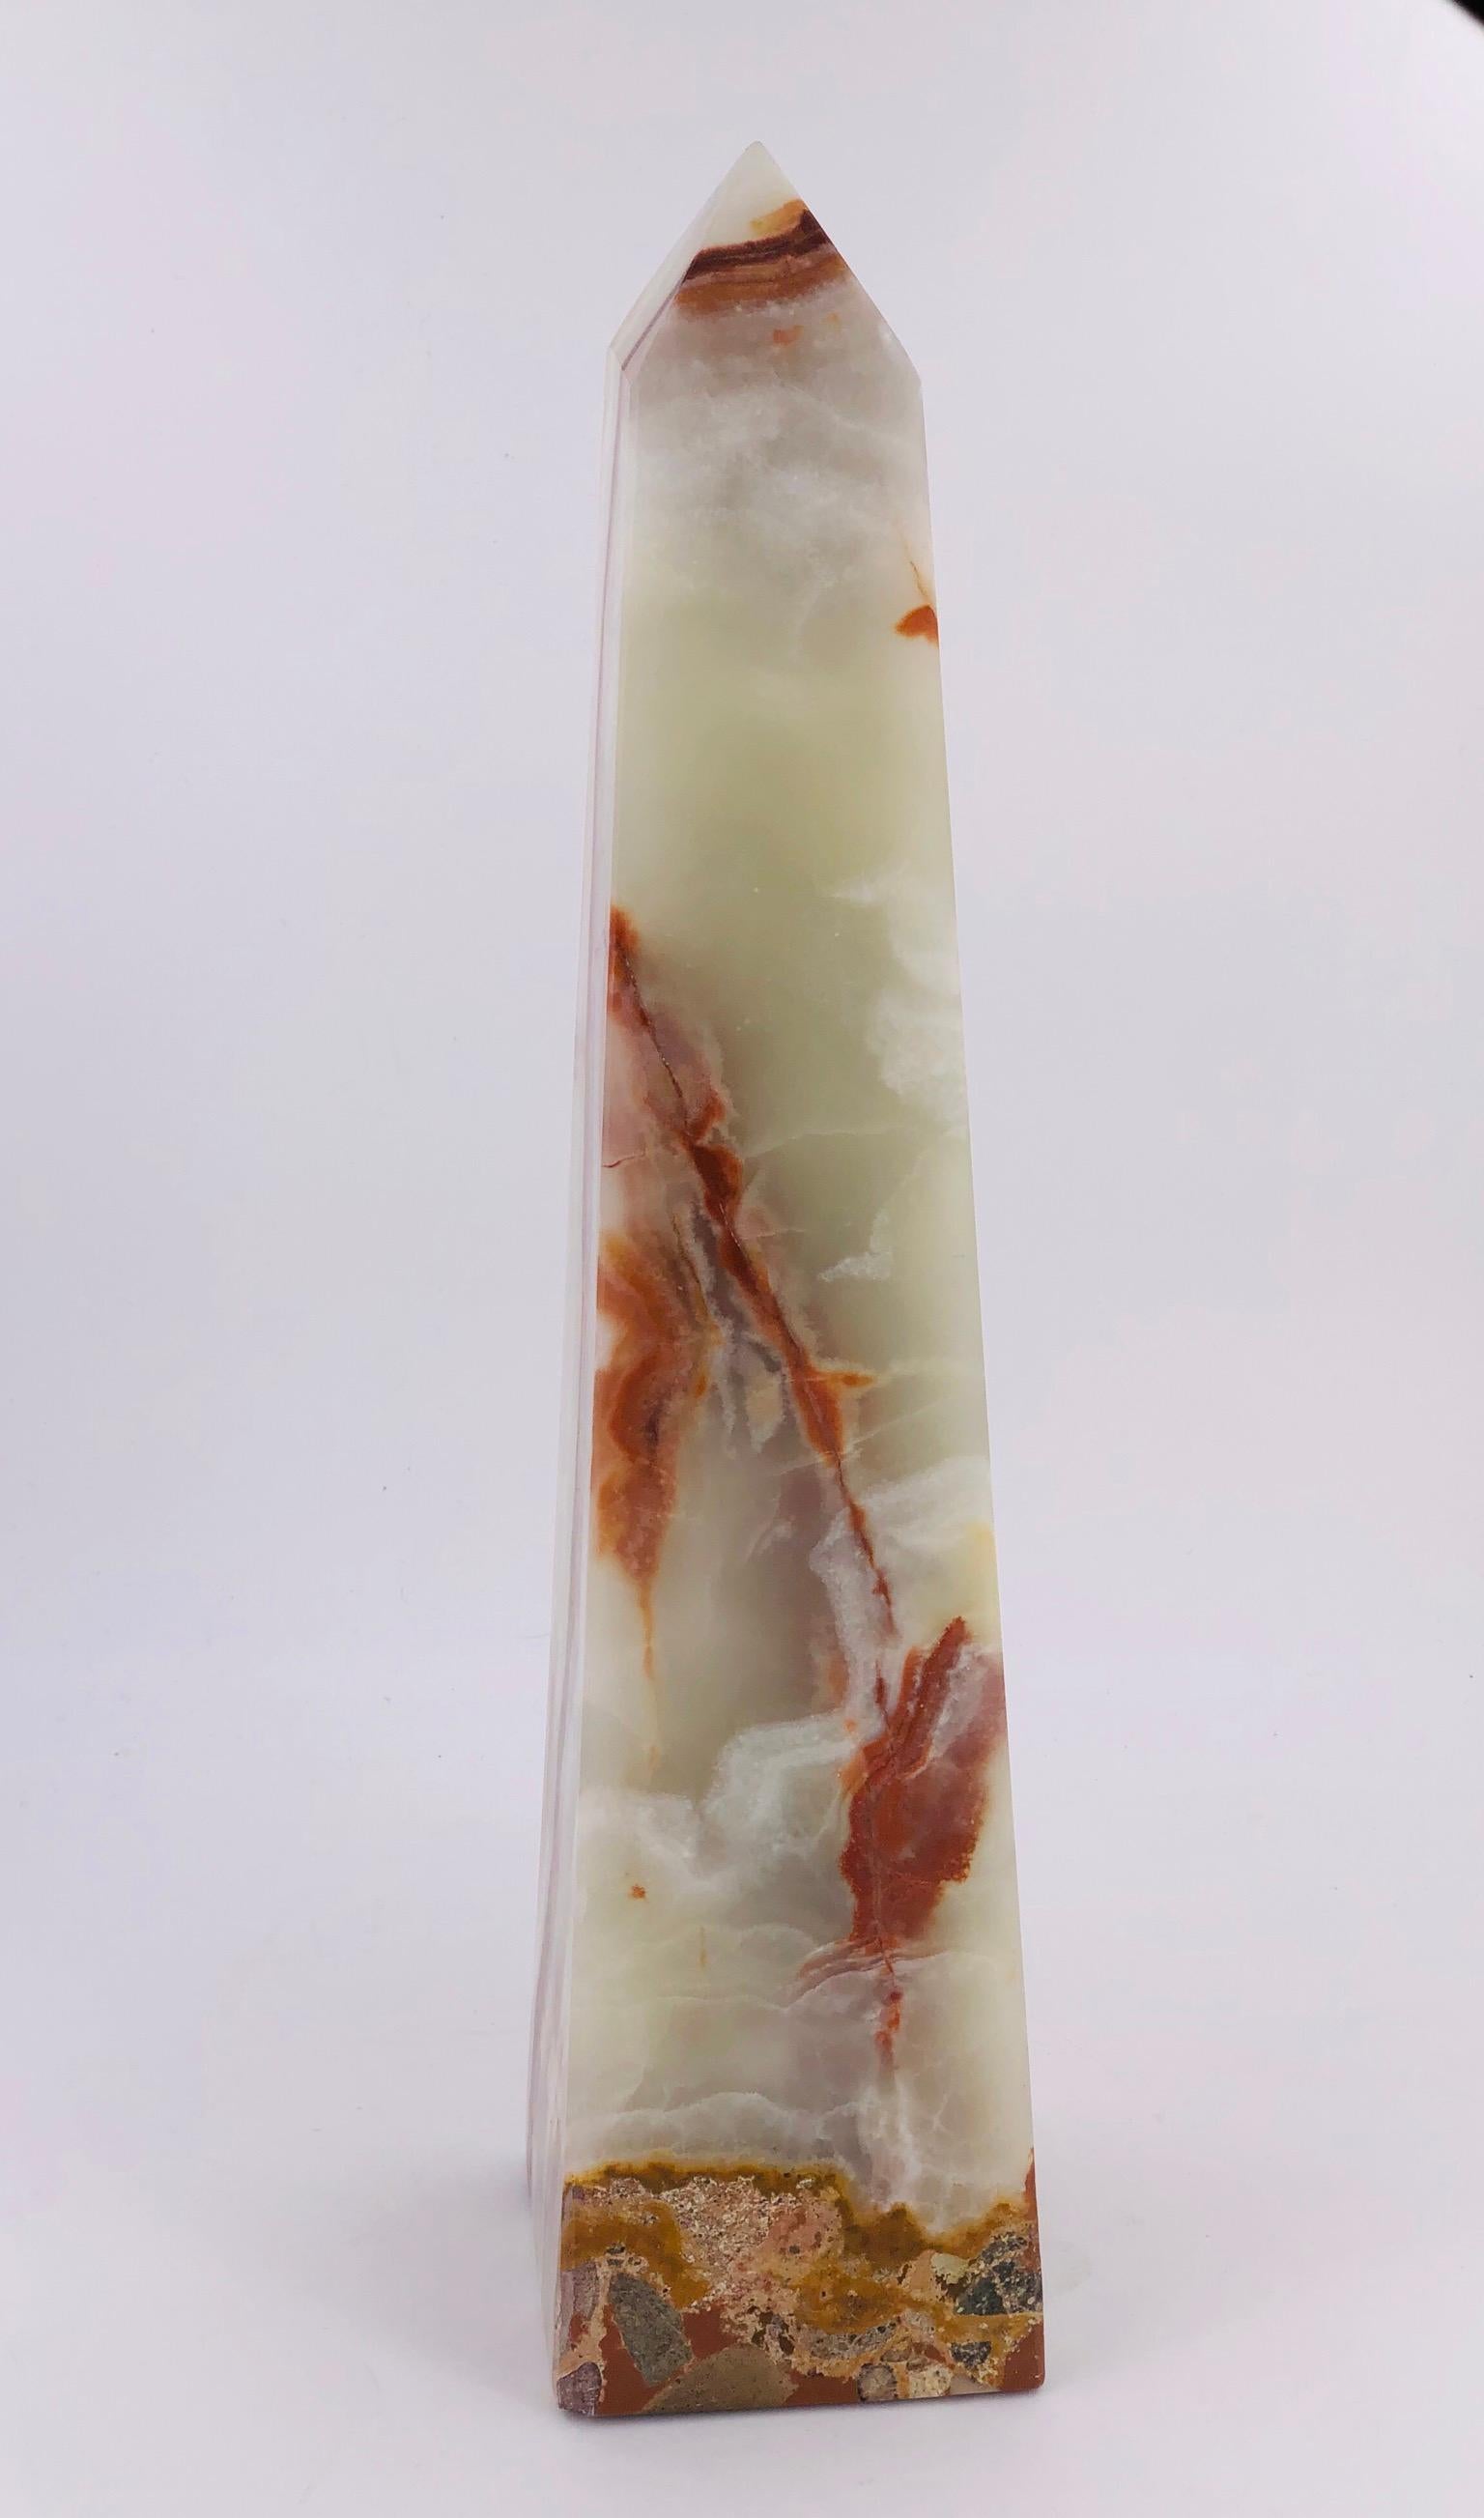 Beautiful solid onyx decorative obelisk, perfect condition no chips or cracks nicely polished. Tall and impressive every side it's different.